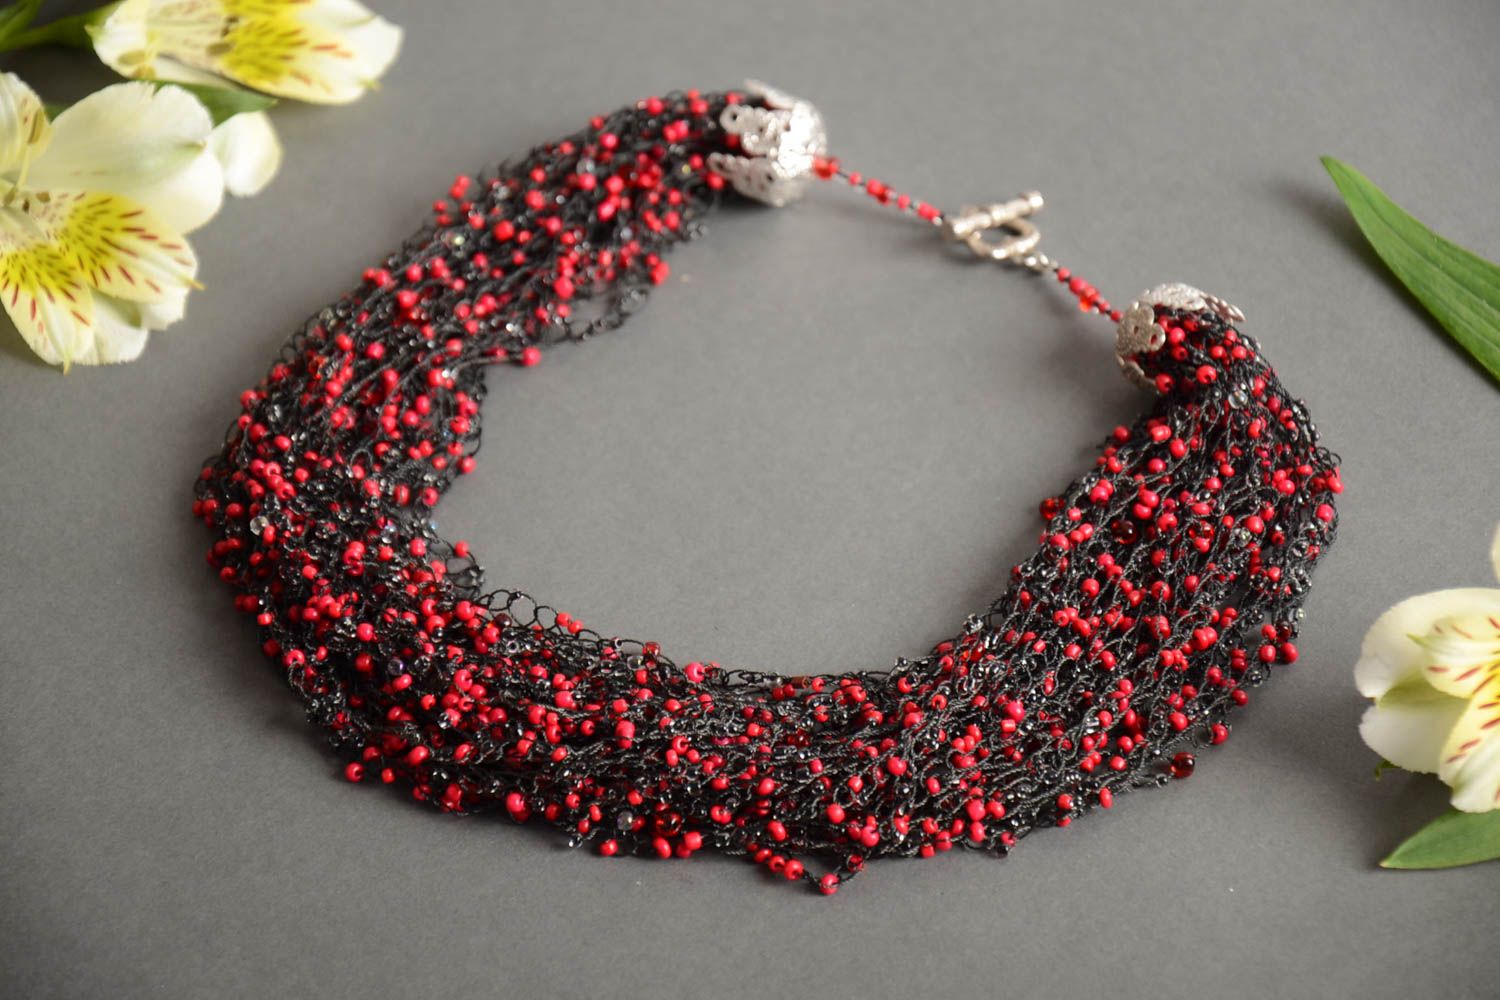 Handmade crocheted beaded necklace in passionate red and black color combination photo 1